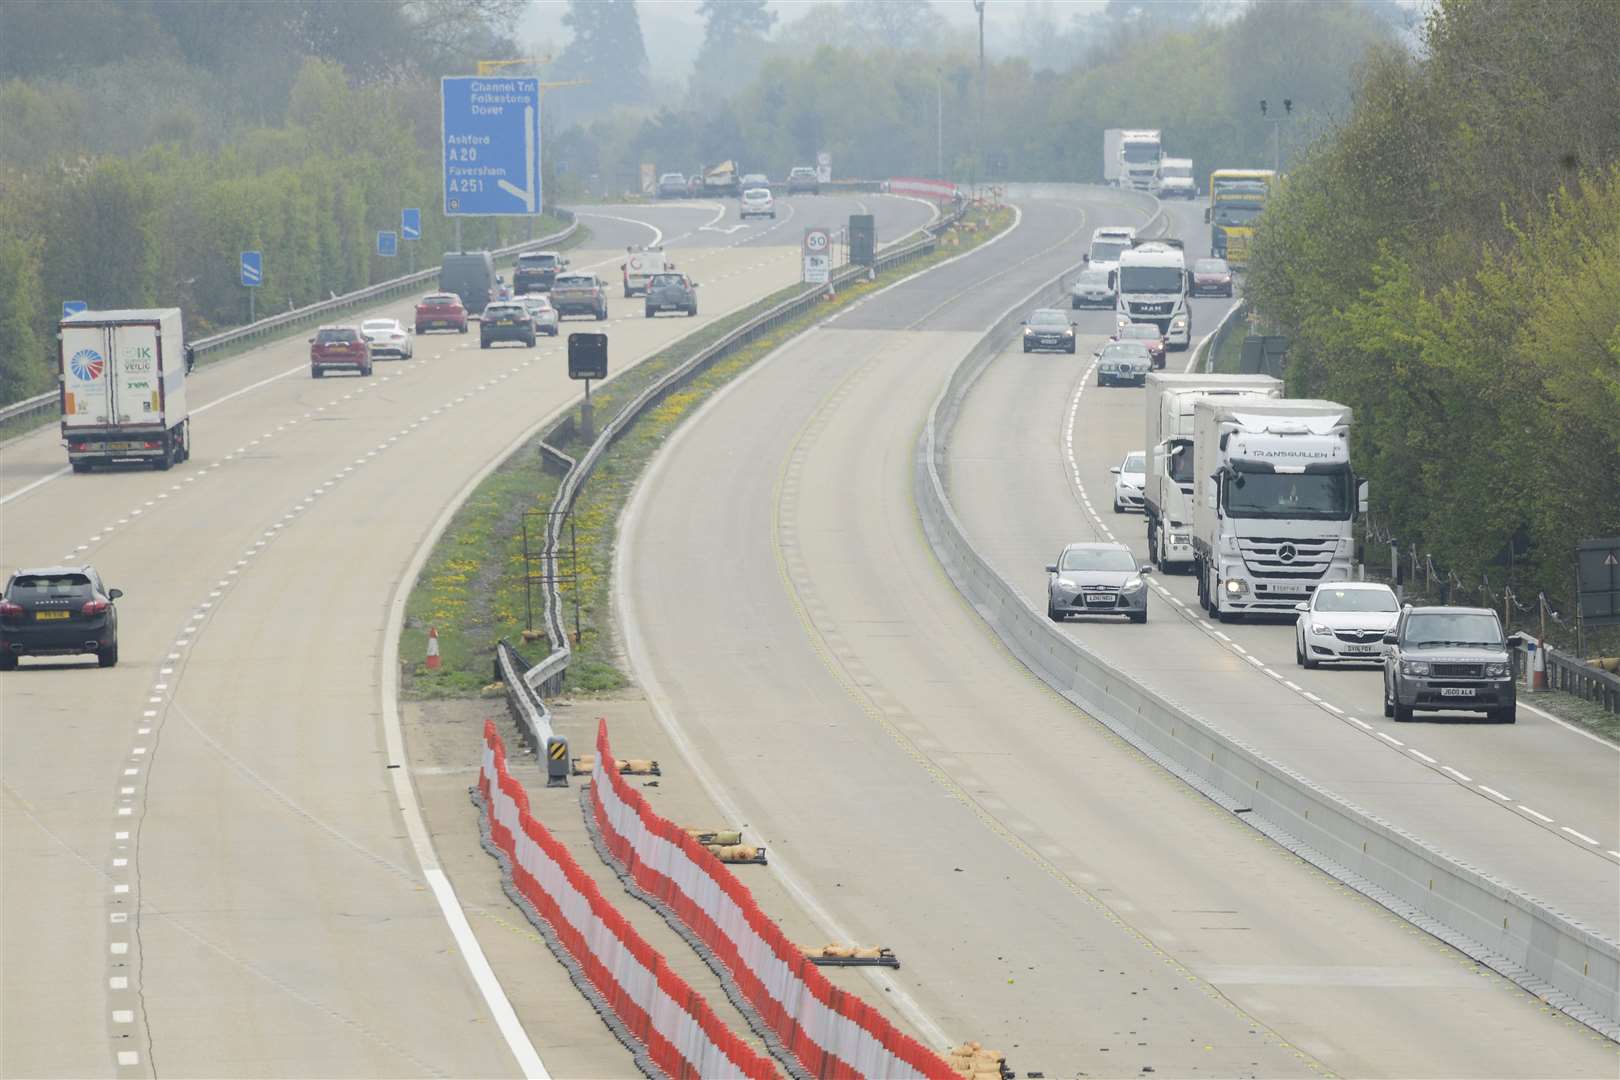 Parts of the M20 will be closed next week